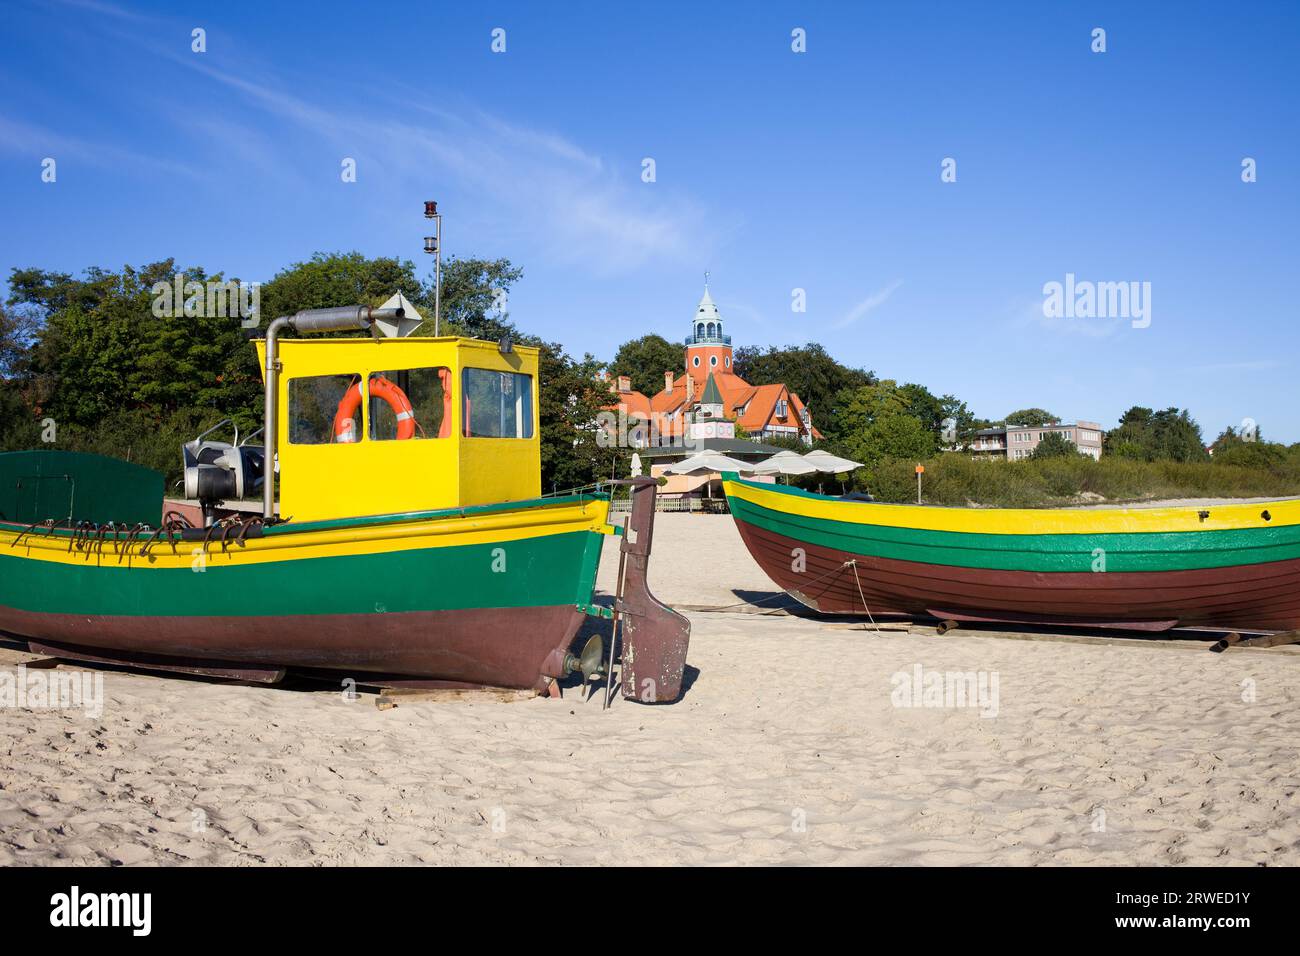 Fishing boats on a sandy beach in Poland Stock Photo